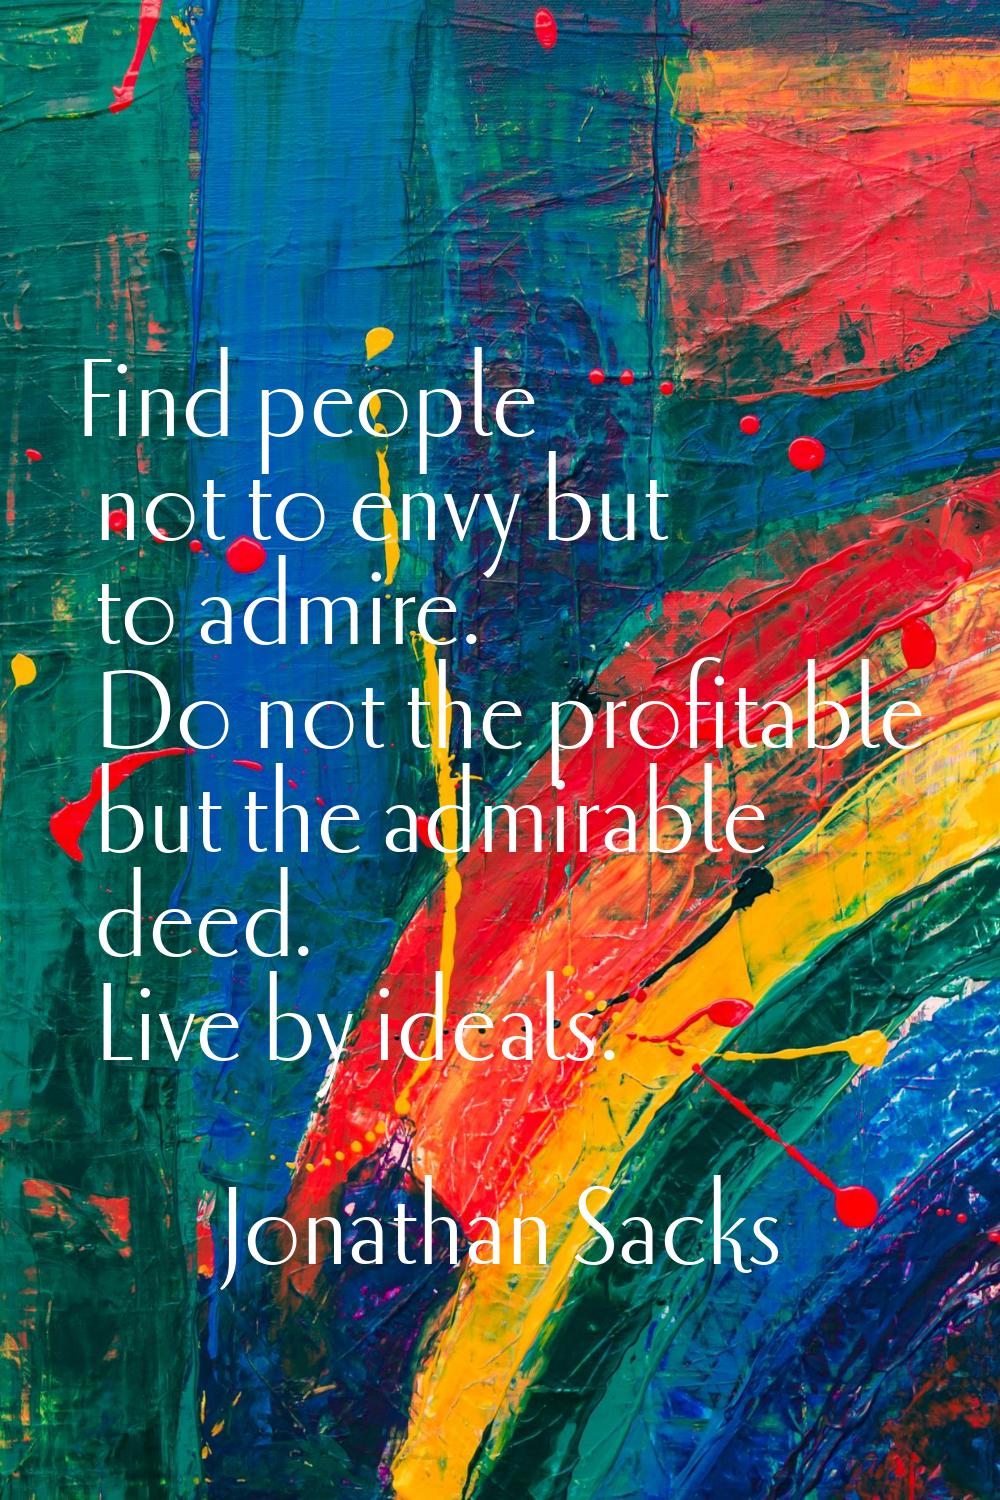 Find people not to envy but to admire. Do not the profitable but the admirable deed. Live by ideals